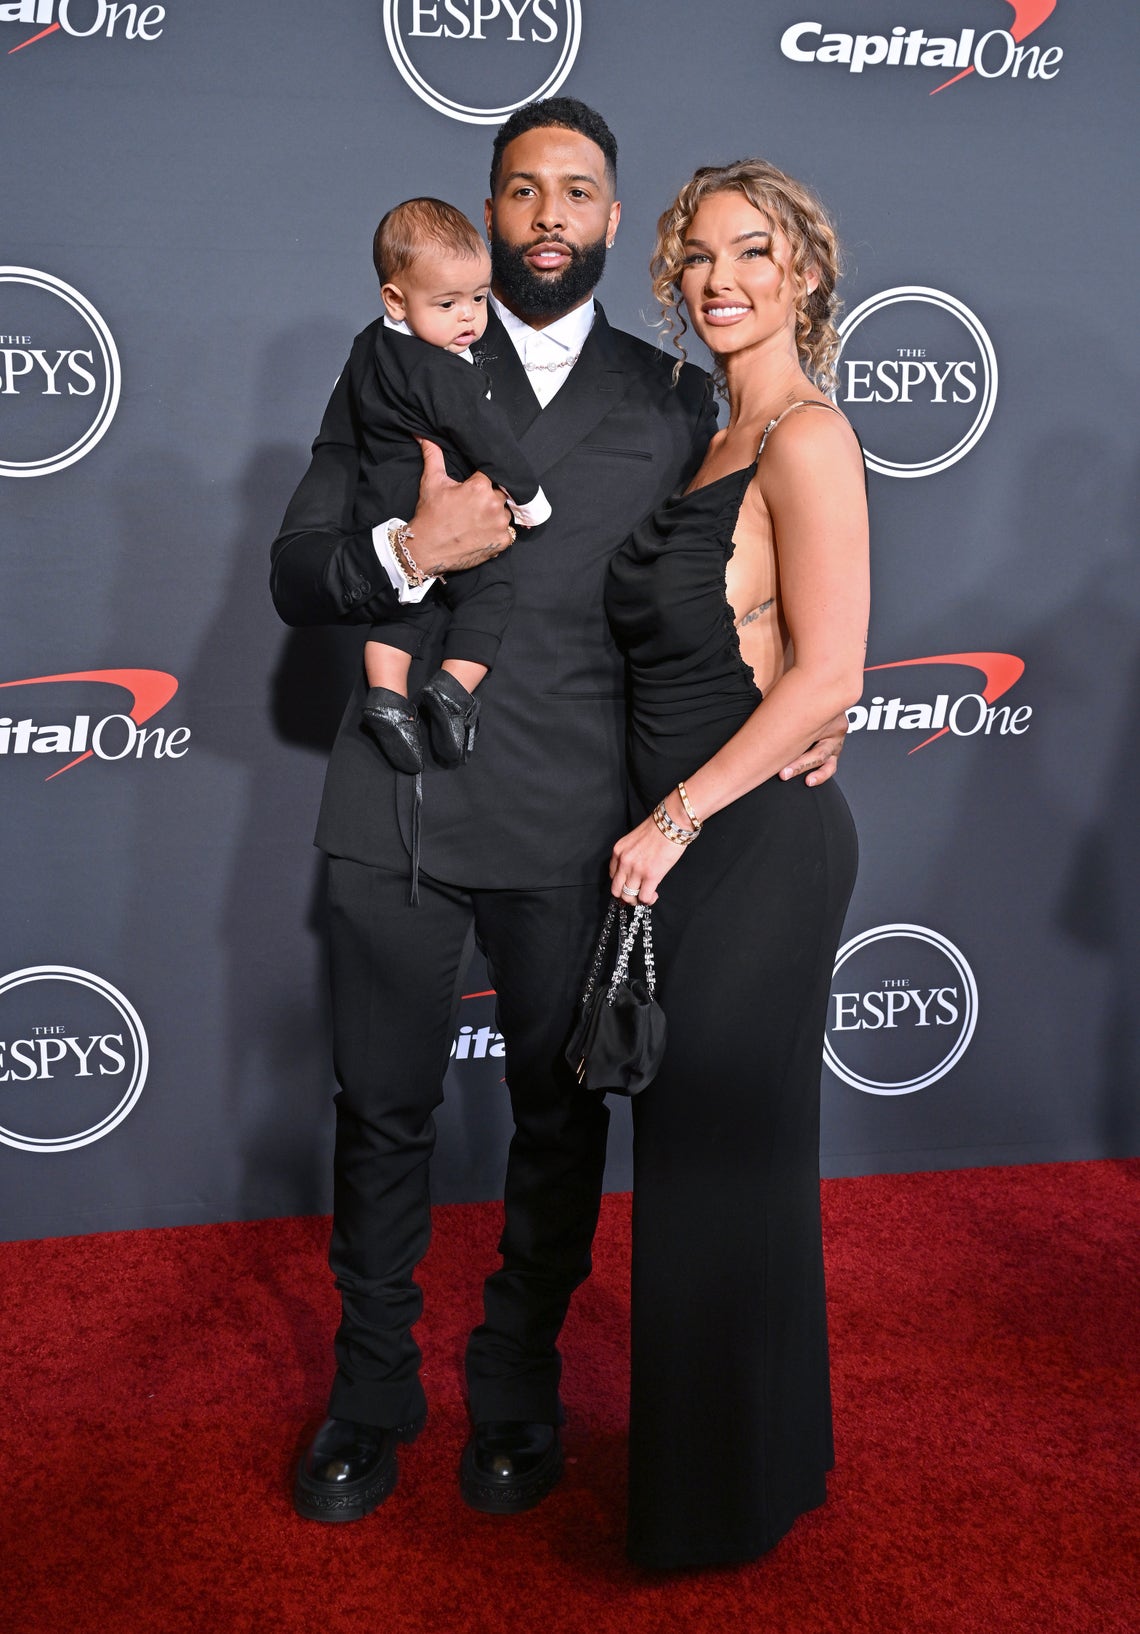 See All the 2022 ESPYS Red Carpet Fashion Looks